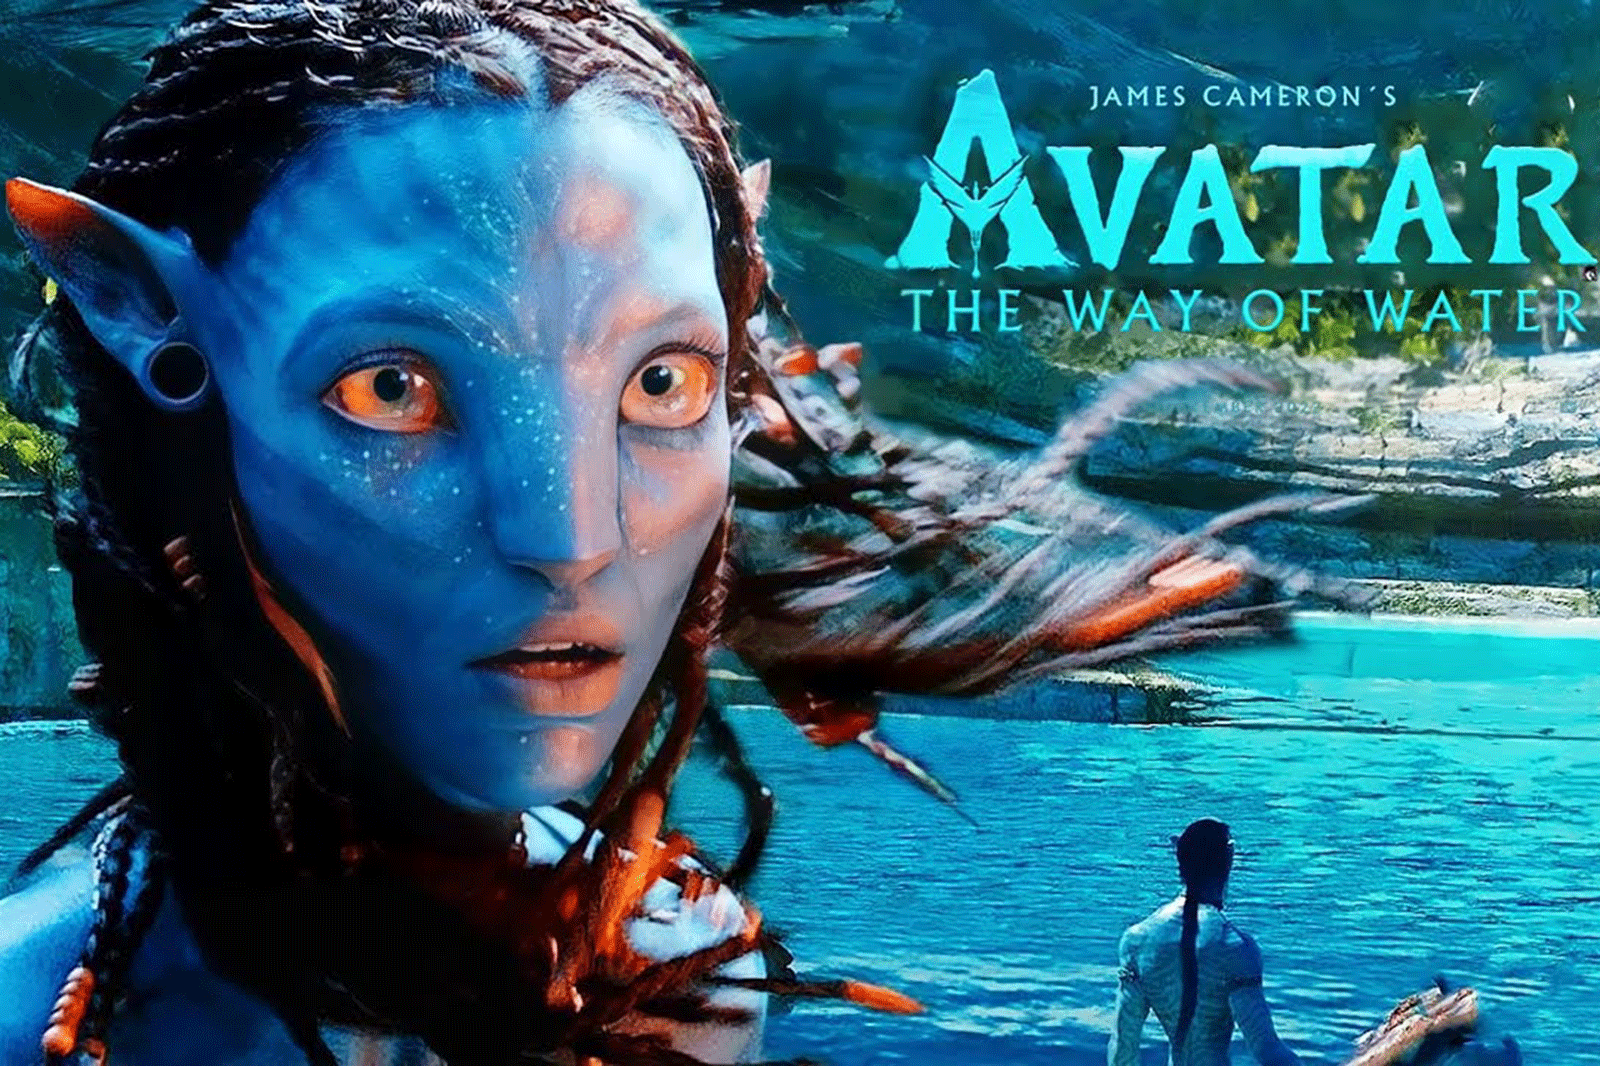 Stunning special effects wow in ‘Avatar: The Way of Water’ - Kenosha.com